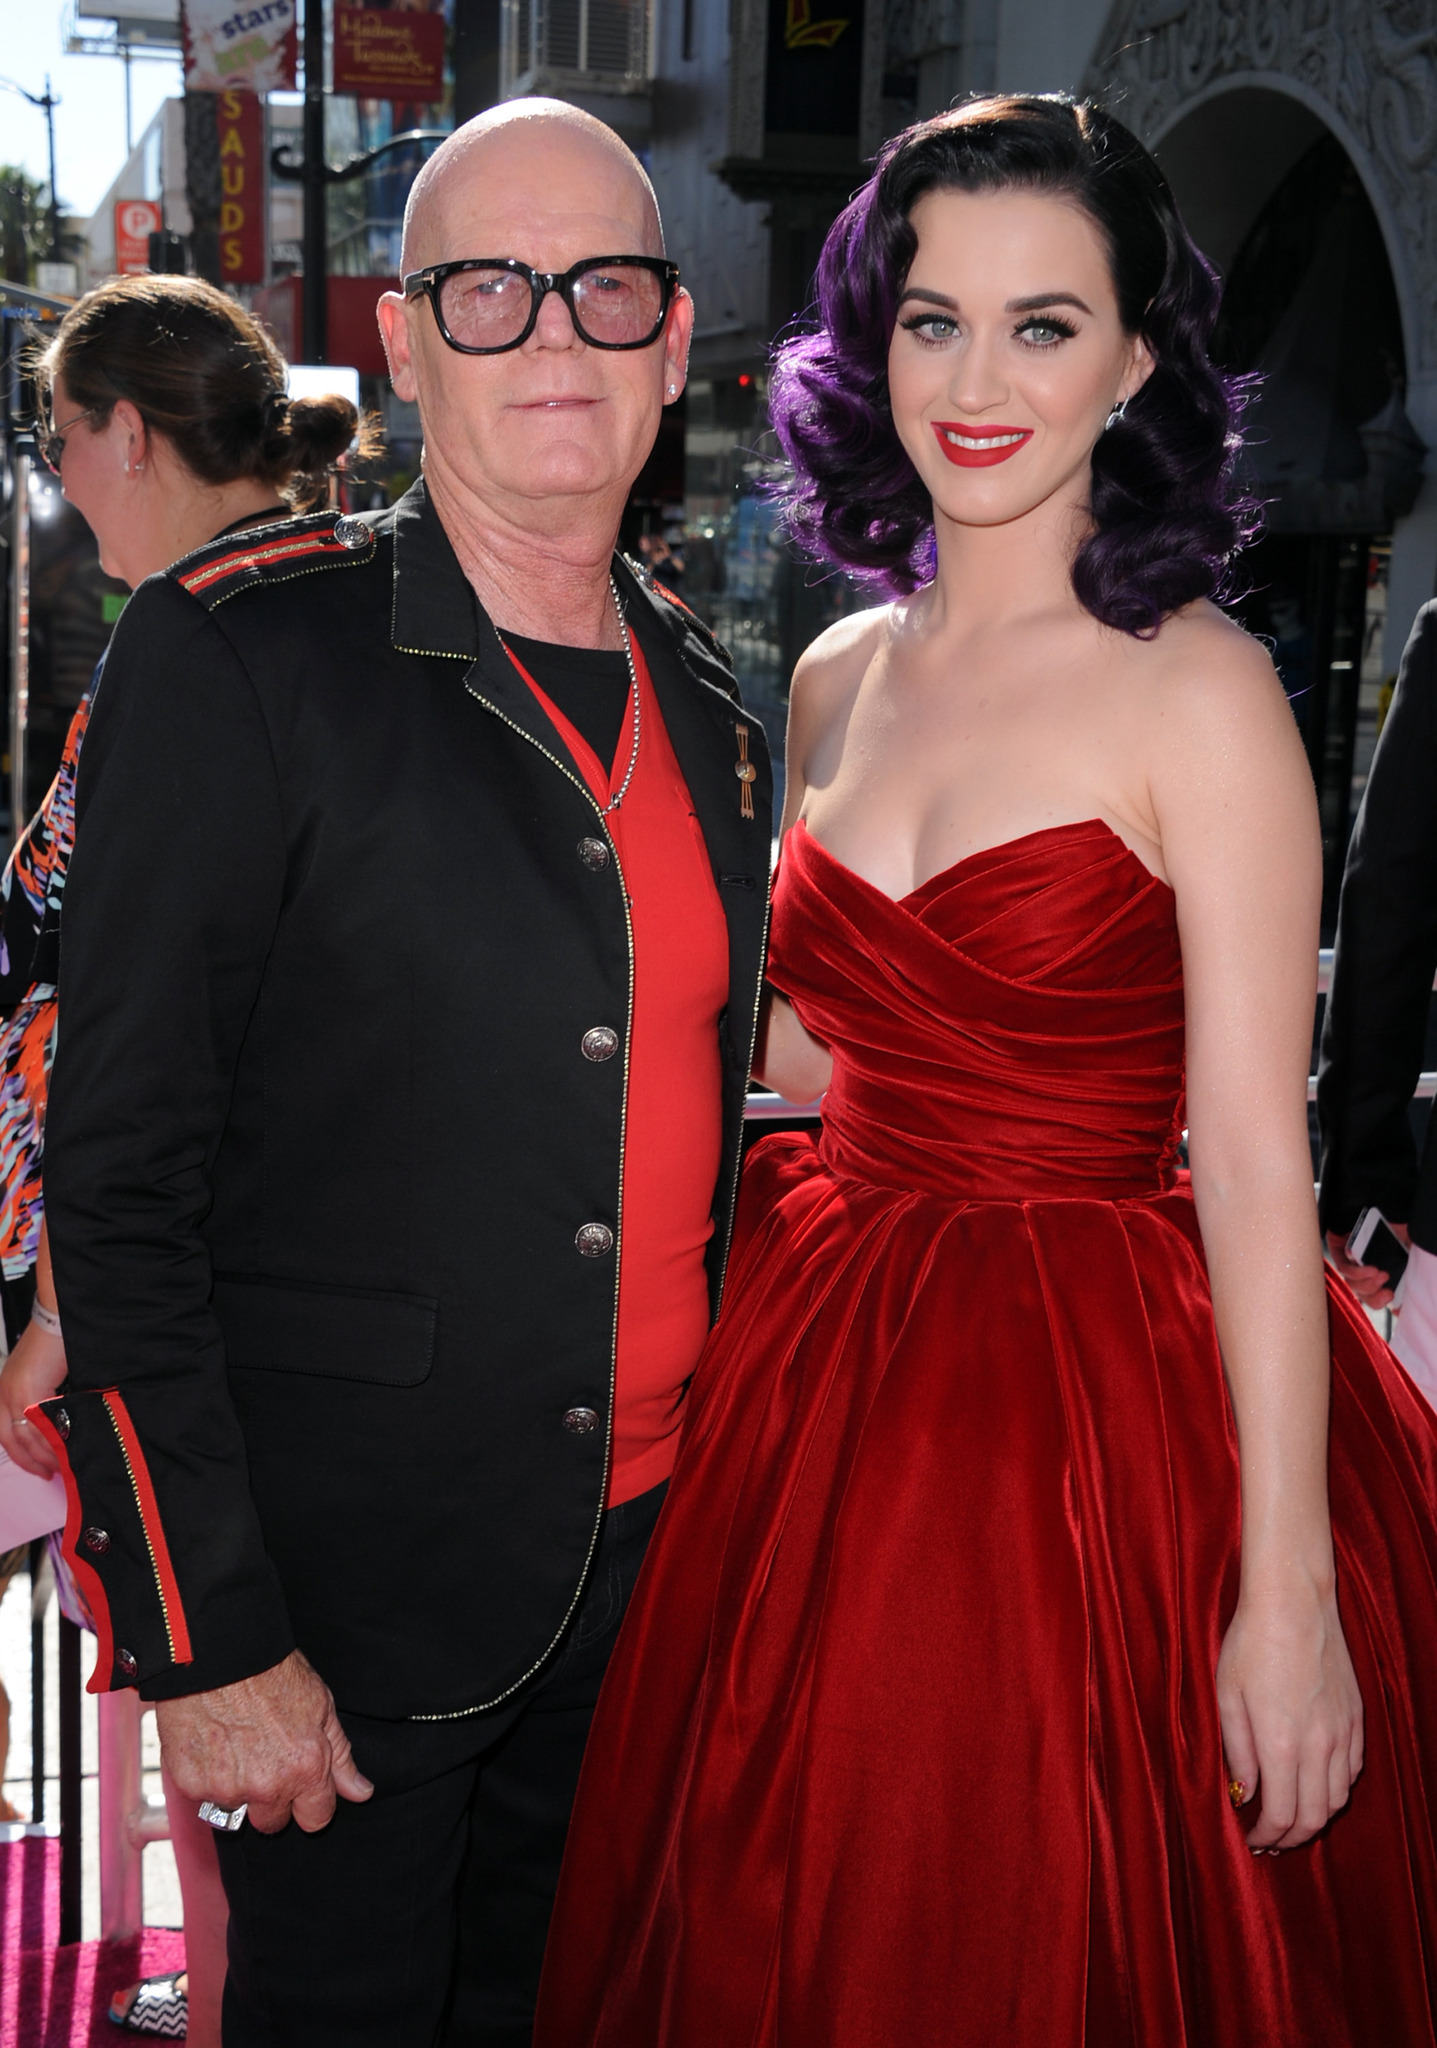 Keith Hudson and Katy Perry